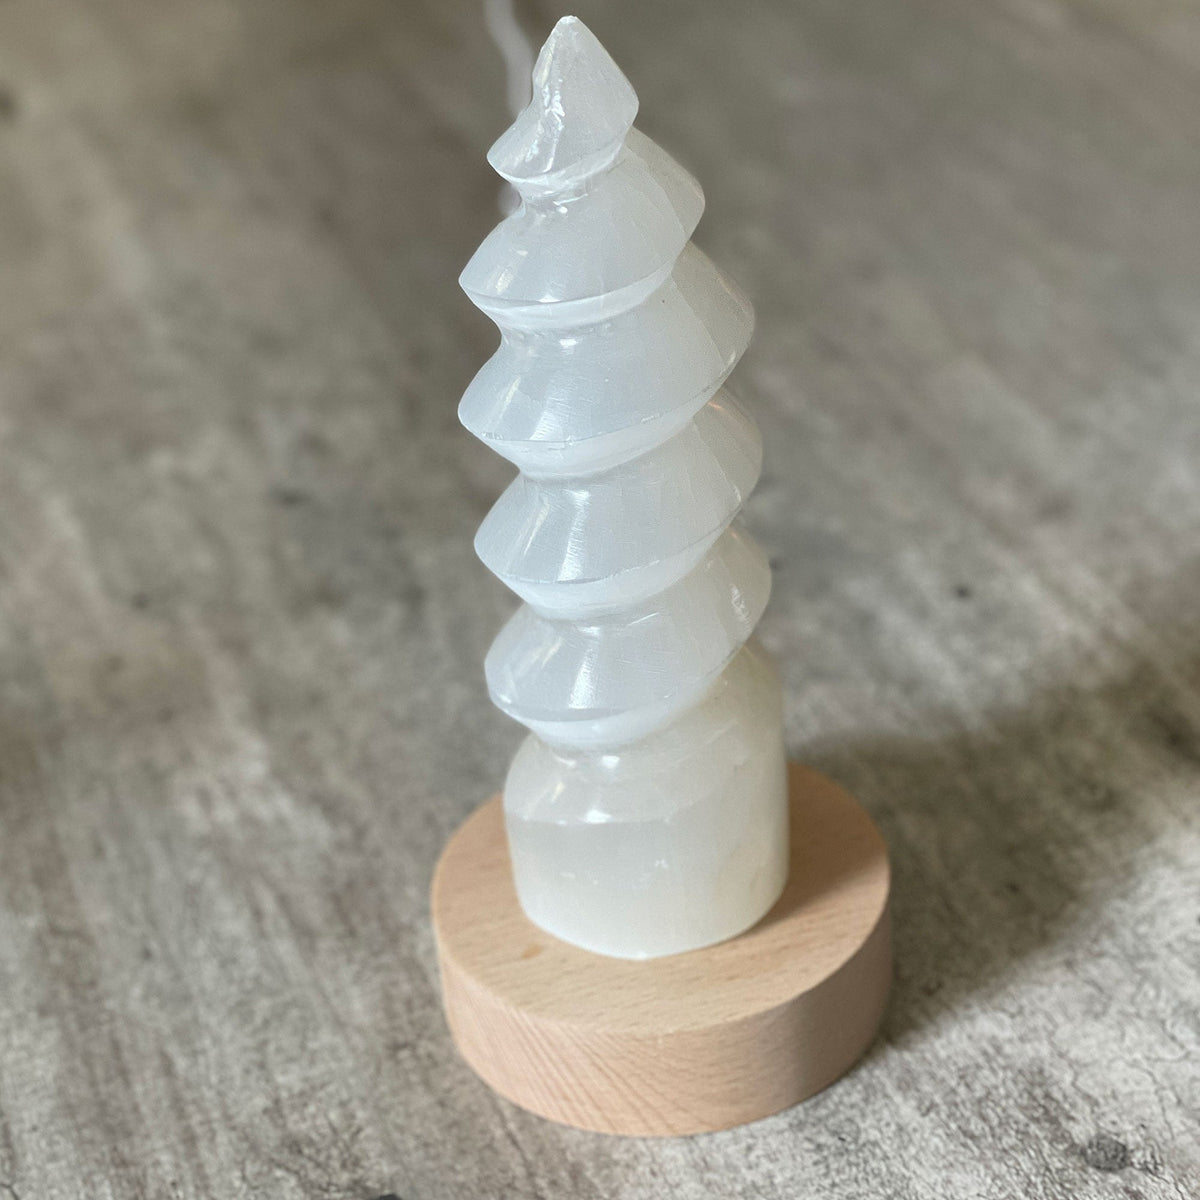 Selenite Lamp - Twister Large - Selenite is a beautiful and versatile crystal that offers numerous benefits, making it a popular choice for both decor and holistic purposes. Its natural beauty and unique translucent appearance make it an eye-catching addition to any home.